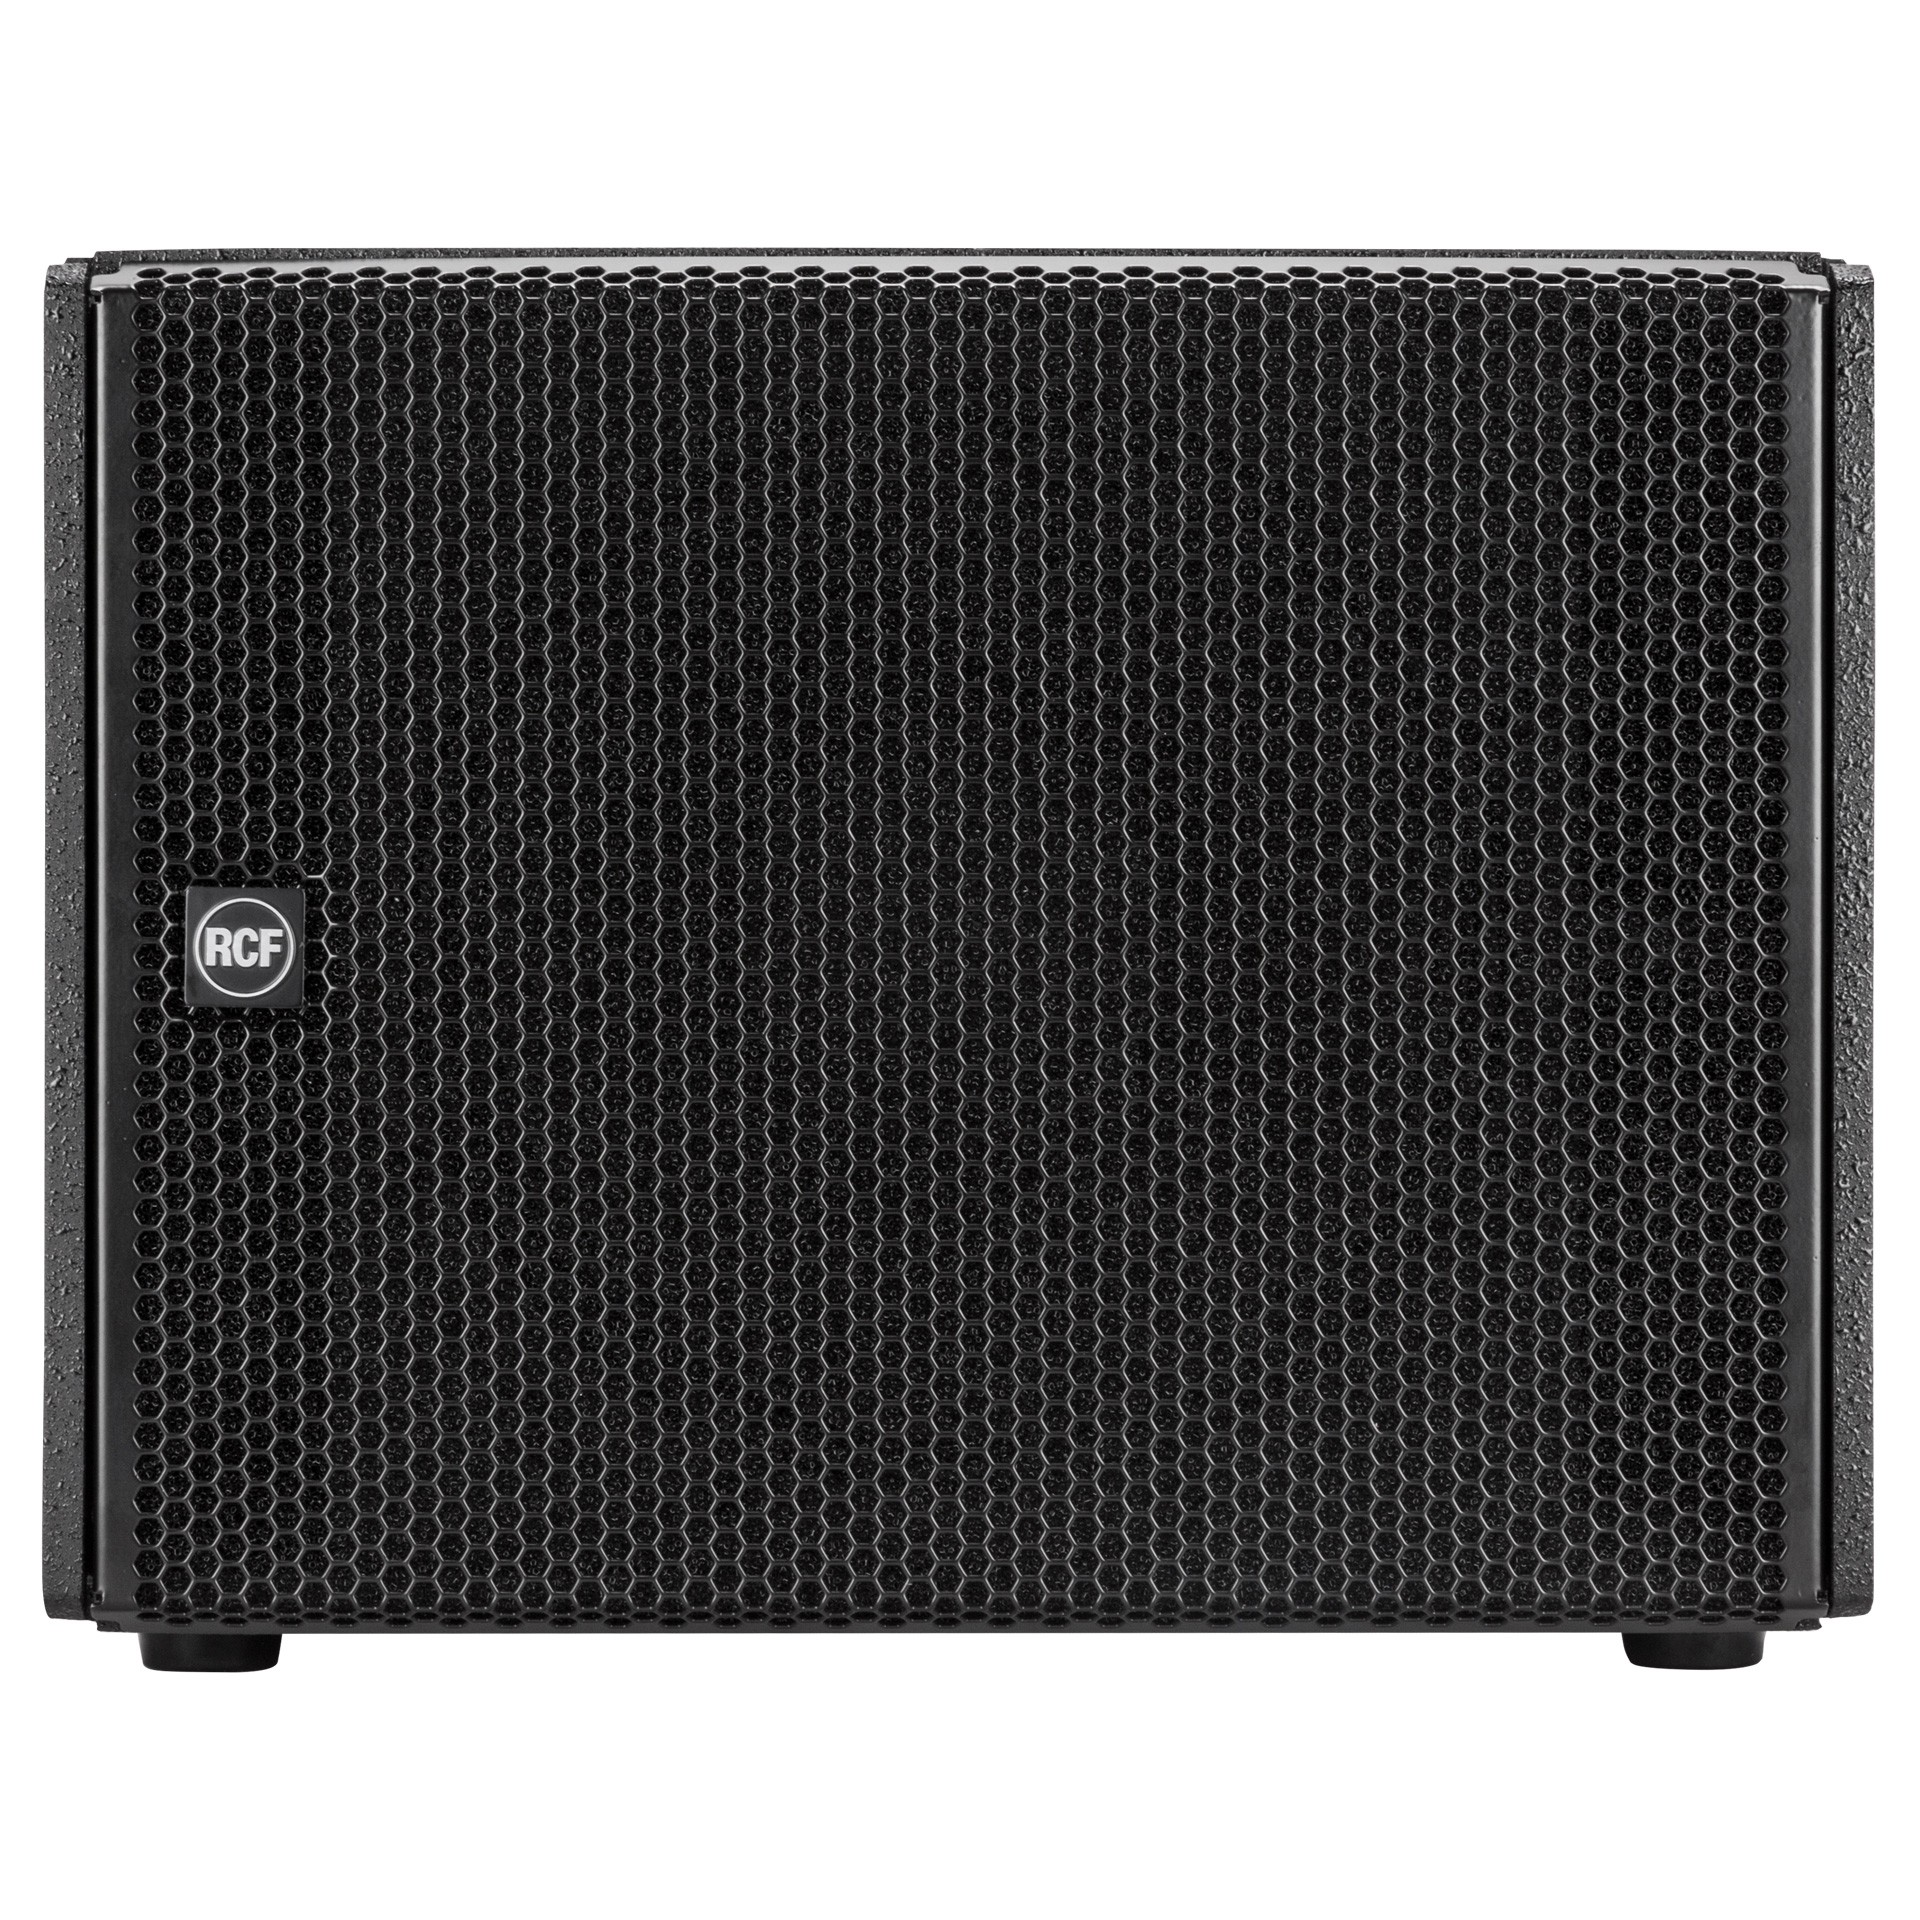 Subwoofere pro - Subwoofer activ RCF HDL 12-AS, audioclub.ro